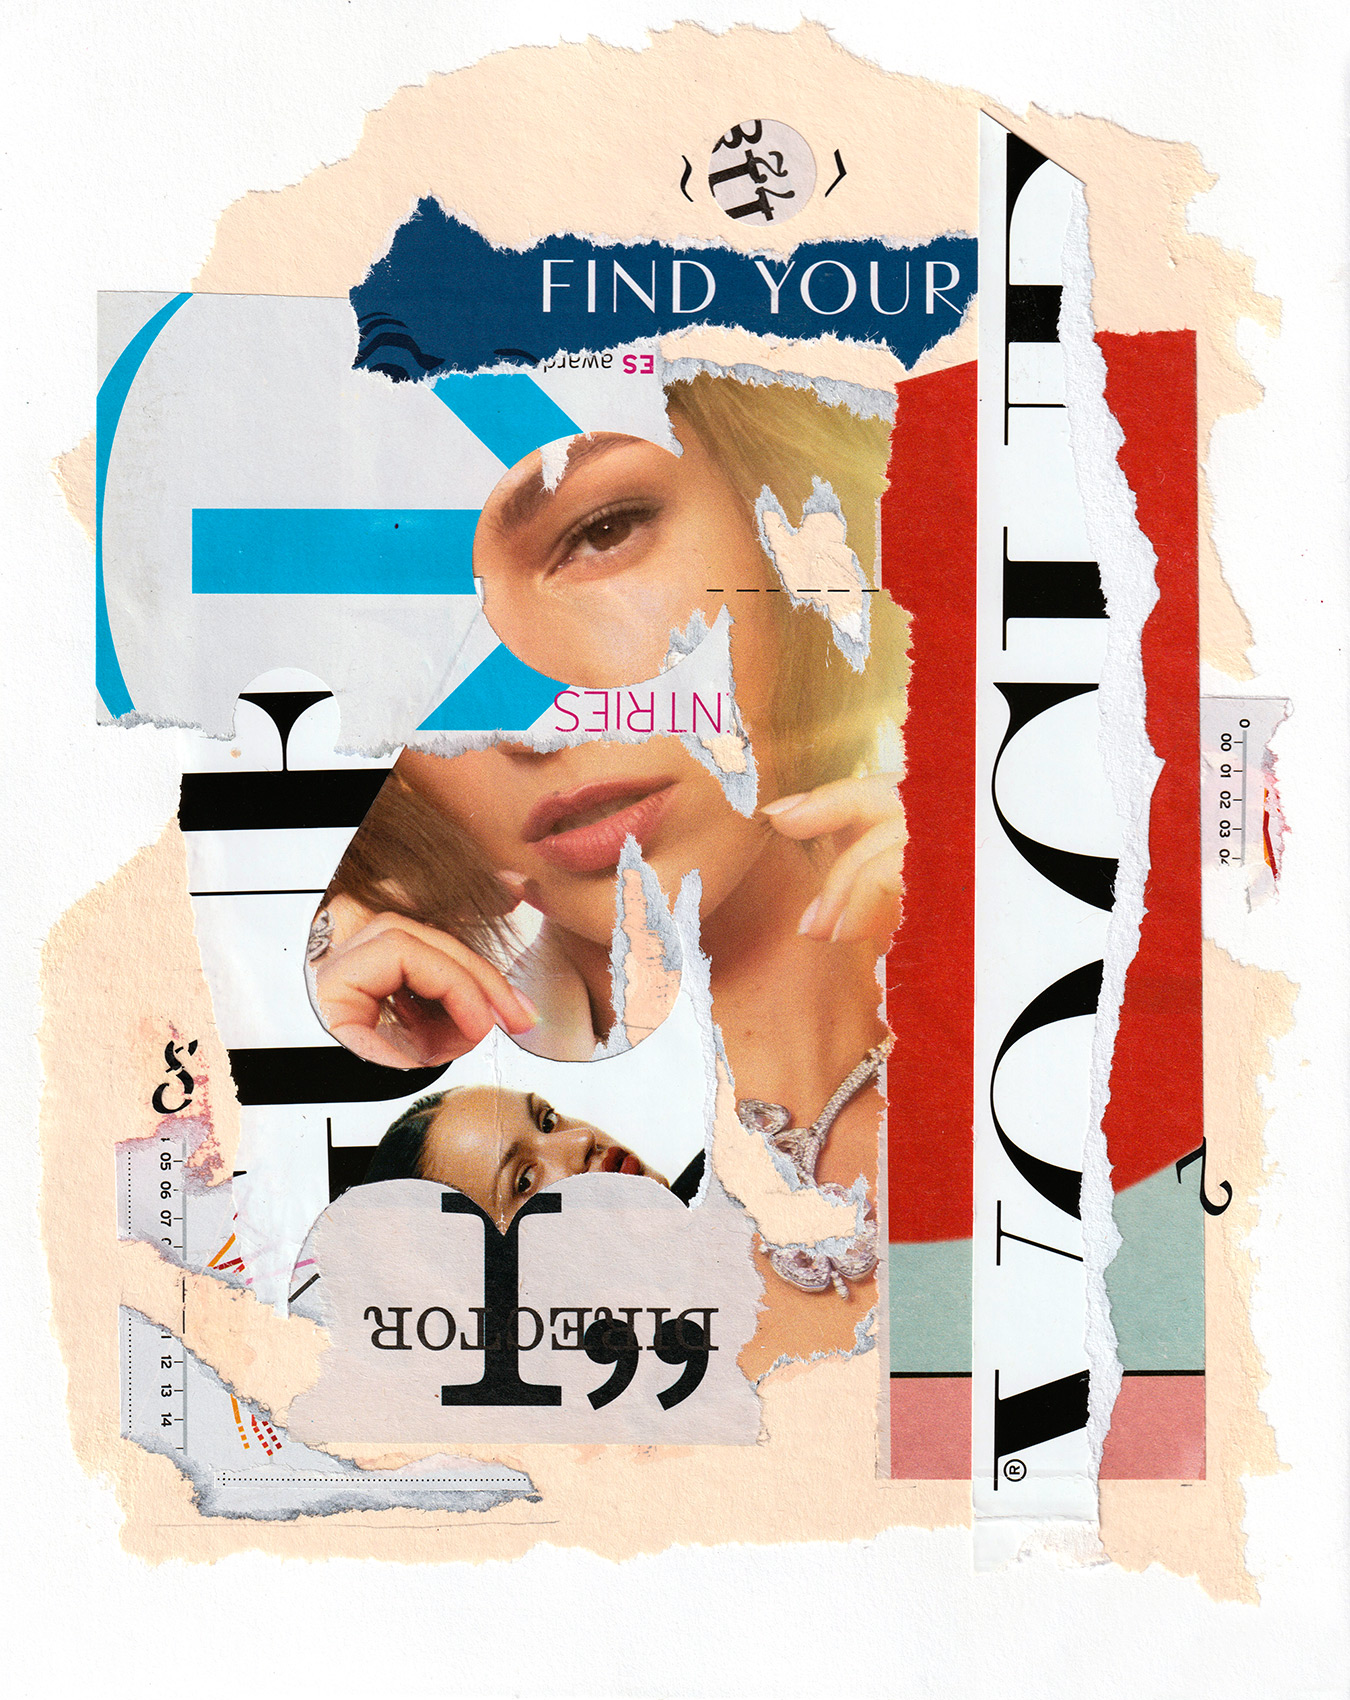 Find_Your-_collage_web